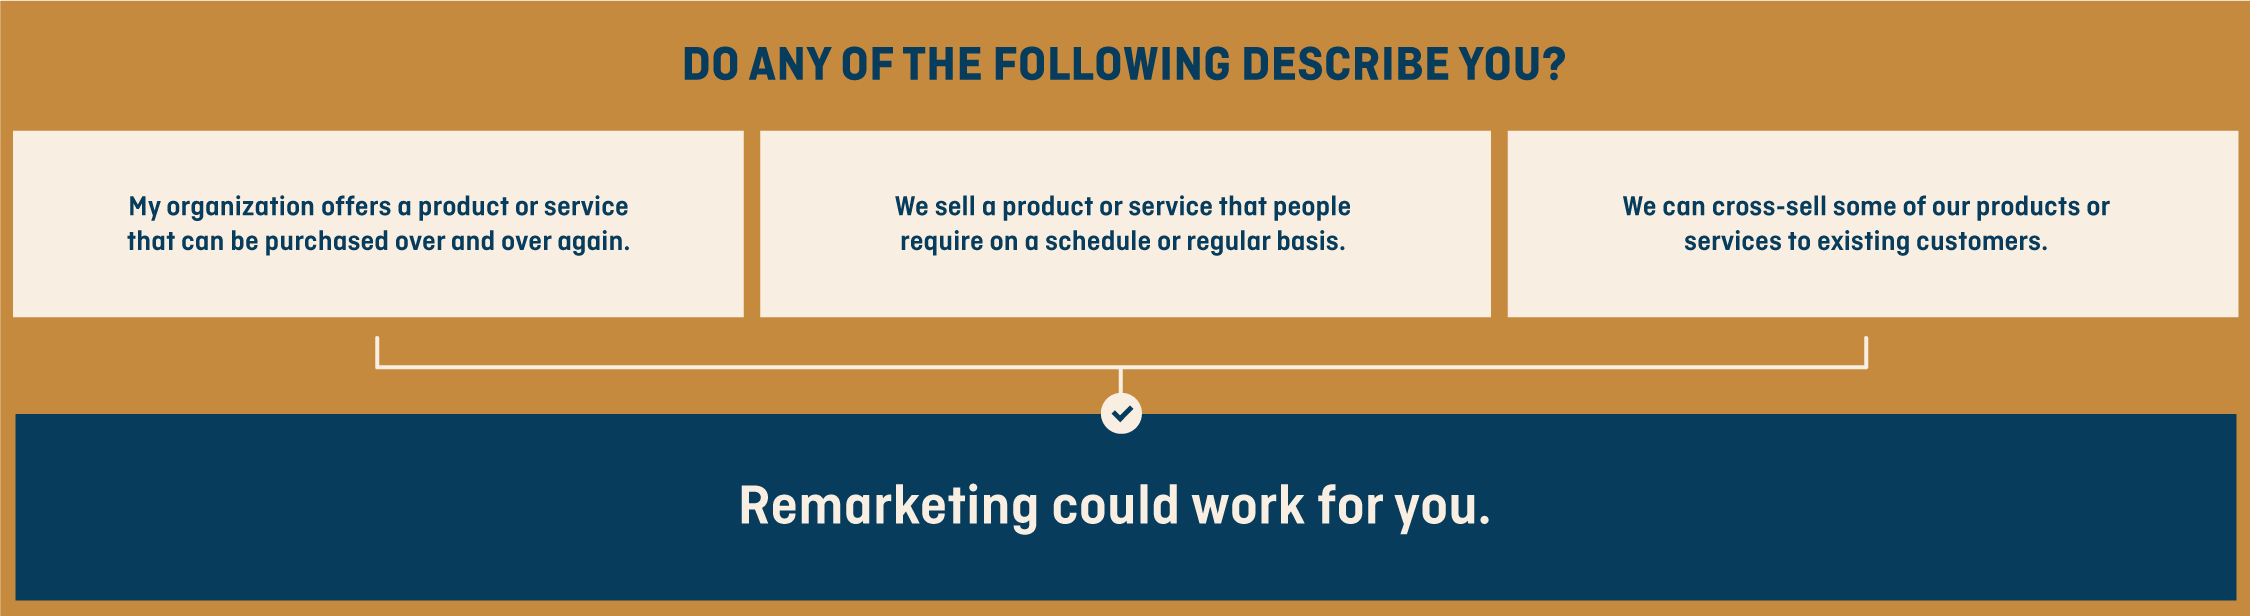 Remarketing could work for you if you offer a product or service that can be purchased over and over again